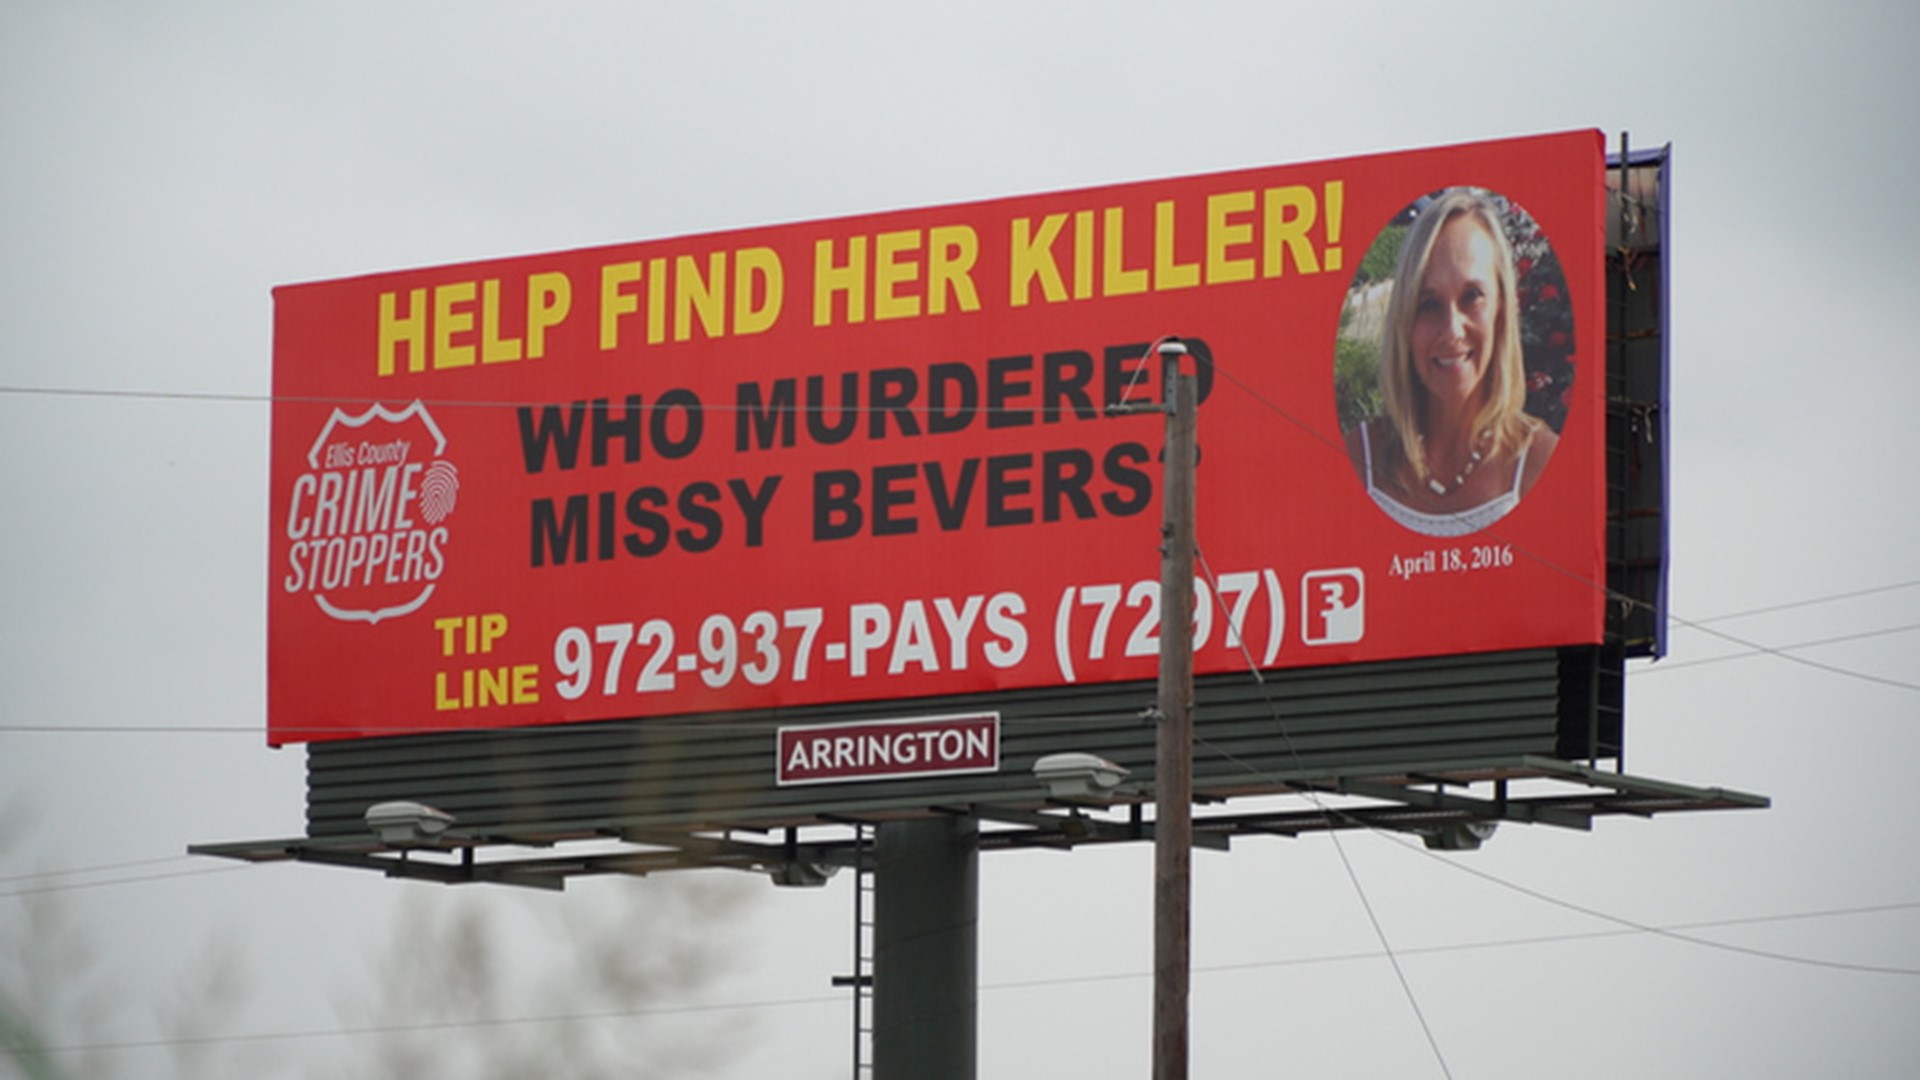 Along State Highway 287, a few miles east of the crime scene, a billboard is bringing new attention to the 2016 unsolved killing of Missy Bevers.